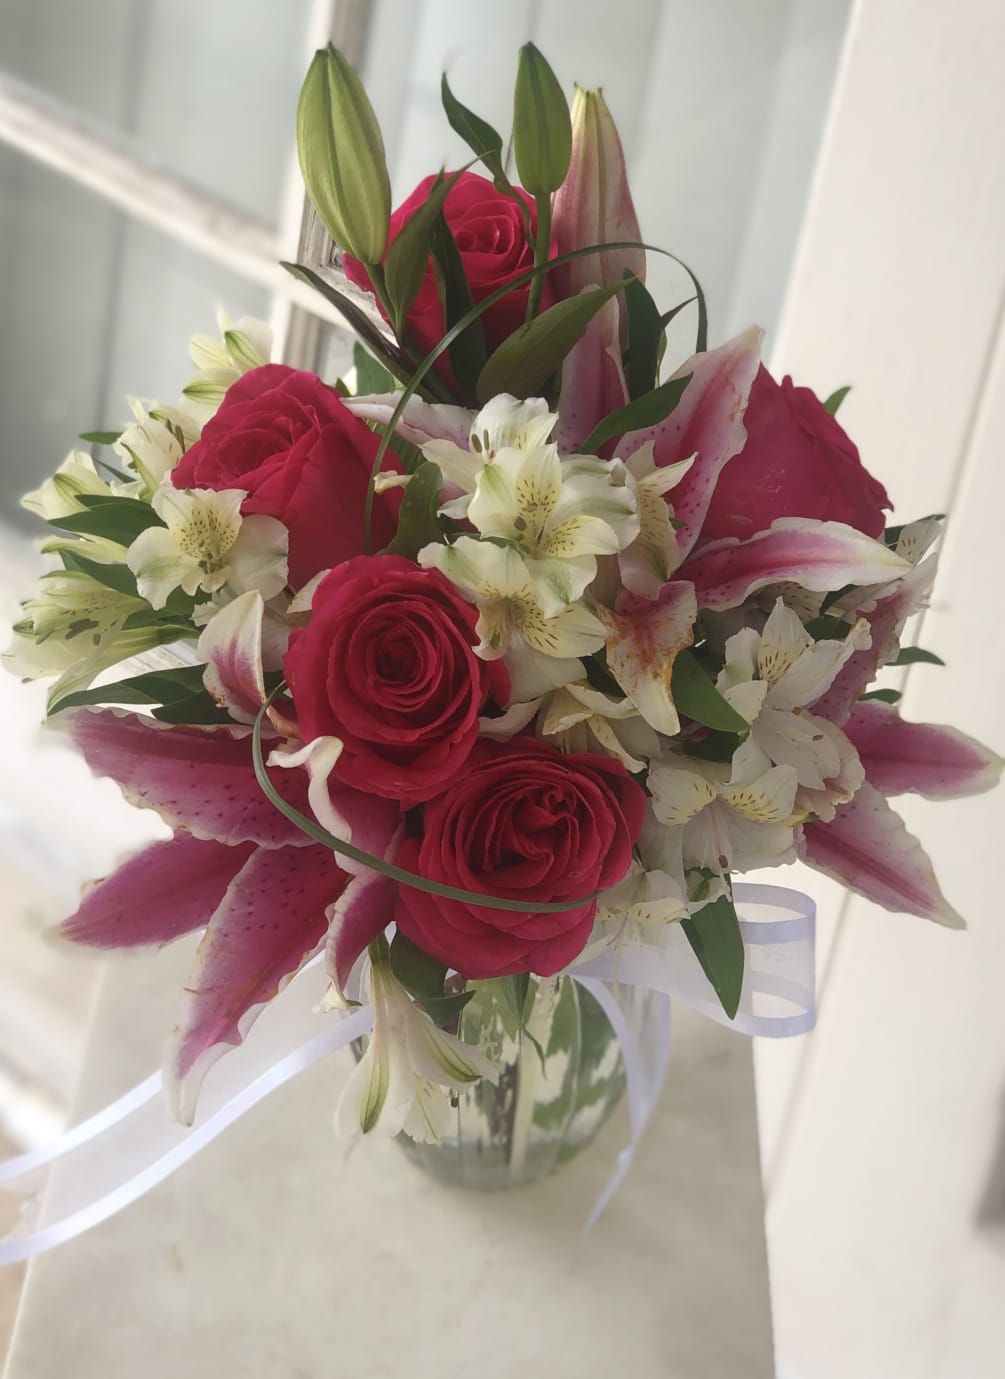 Hot pink roses, stargazer lilies, accented with other blooms  are arranged